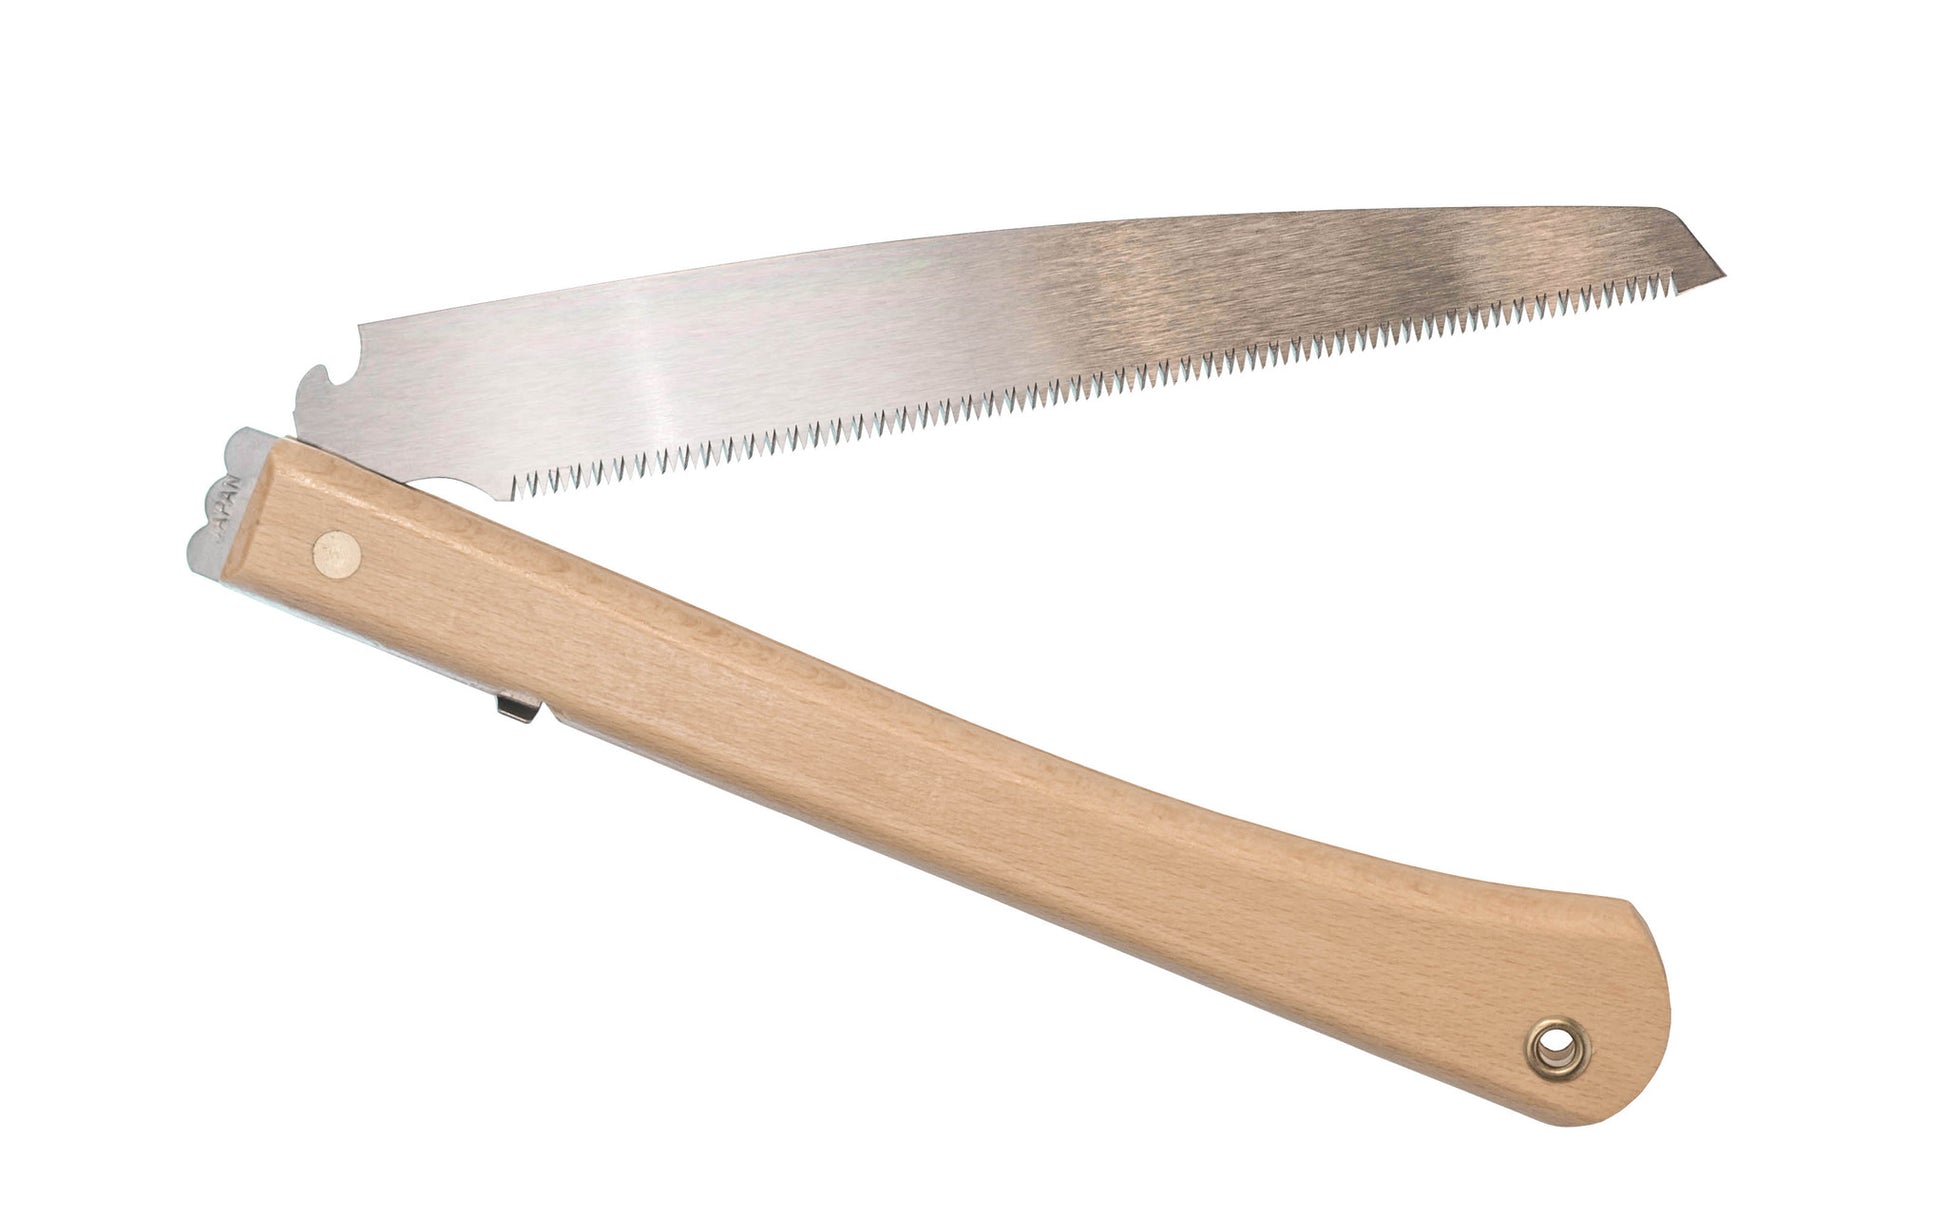 Made in Japan · Crosscut Teeth: 15 TPI ~ Good all-purpose saw ~ Foldable blade ~ 1-3/8" narrow blade - good for tight areas Brass riveted in a Beechwood handle with lanyard hole ~ Japanese pull-saw that can be used for general lumber, dry woods, & for green woods. 19" overall length folding pull-saw